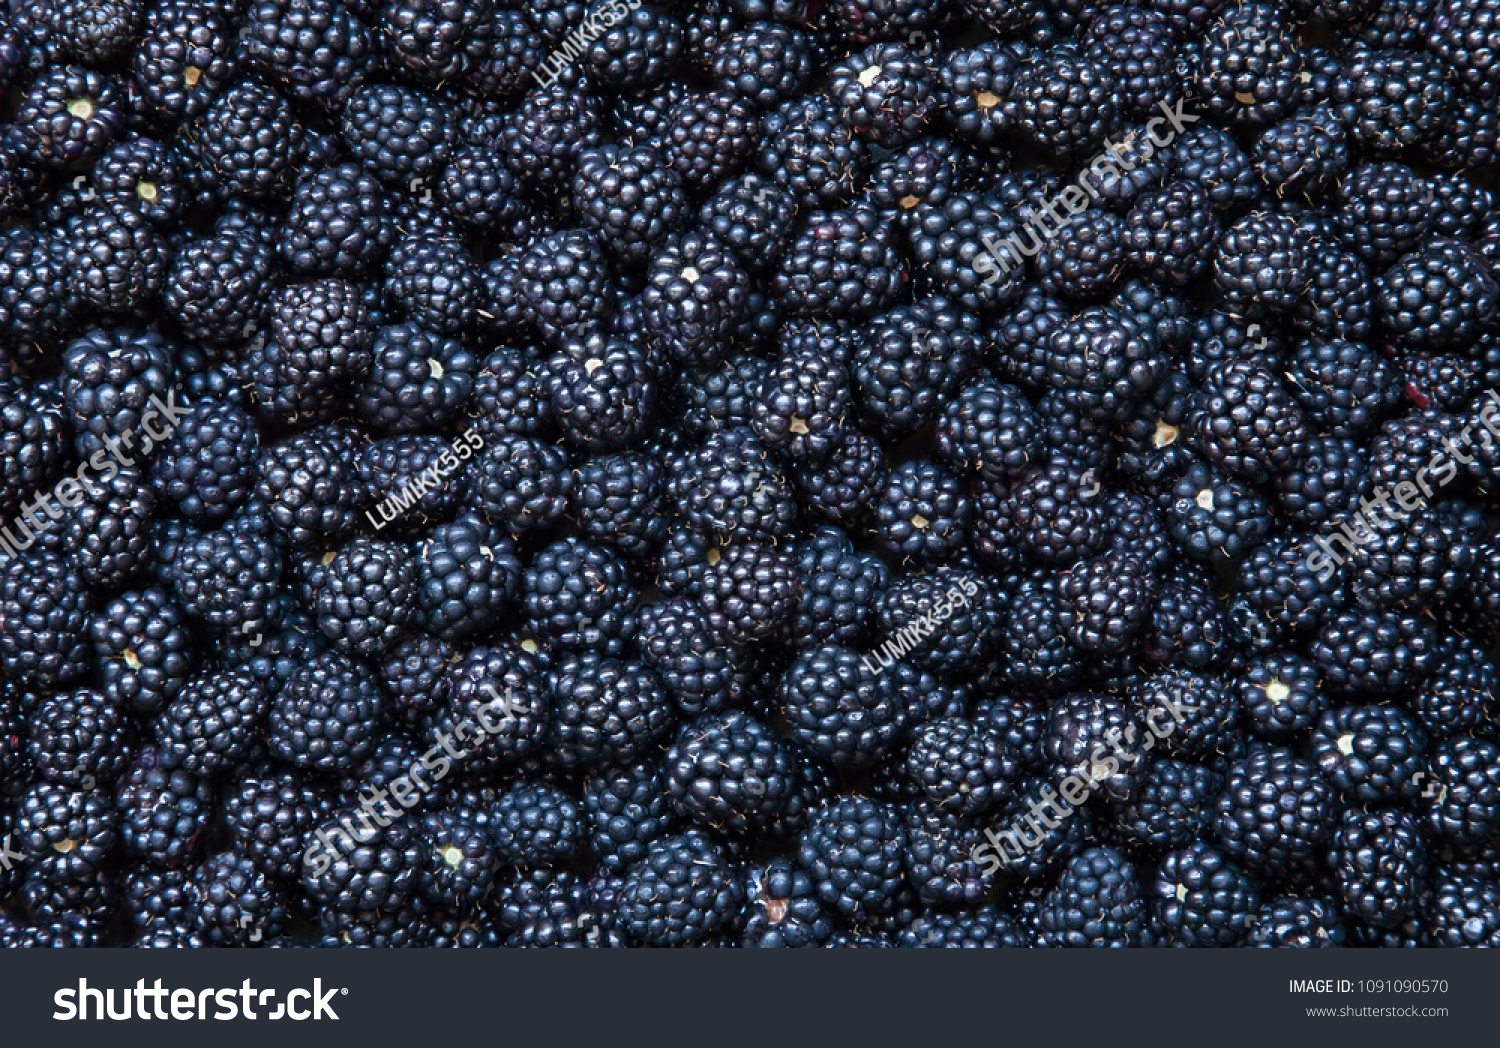 Background from fresh Blackberries, close up. Lot of ripe juicy wild fruit raw berries lying on the table. Top view, Flat lay #1091090570